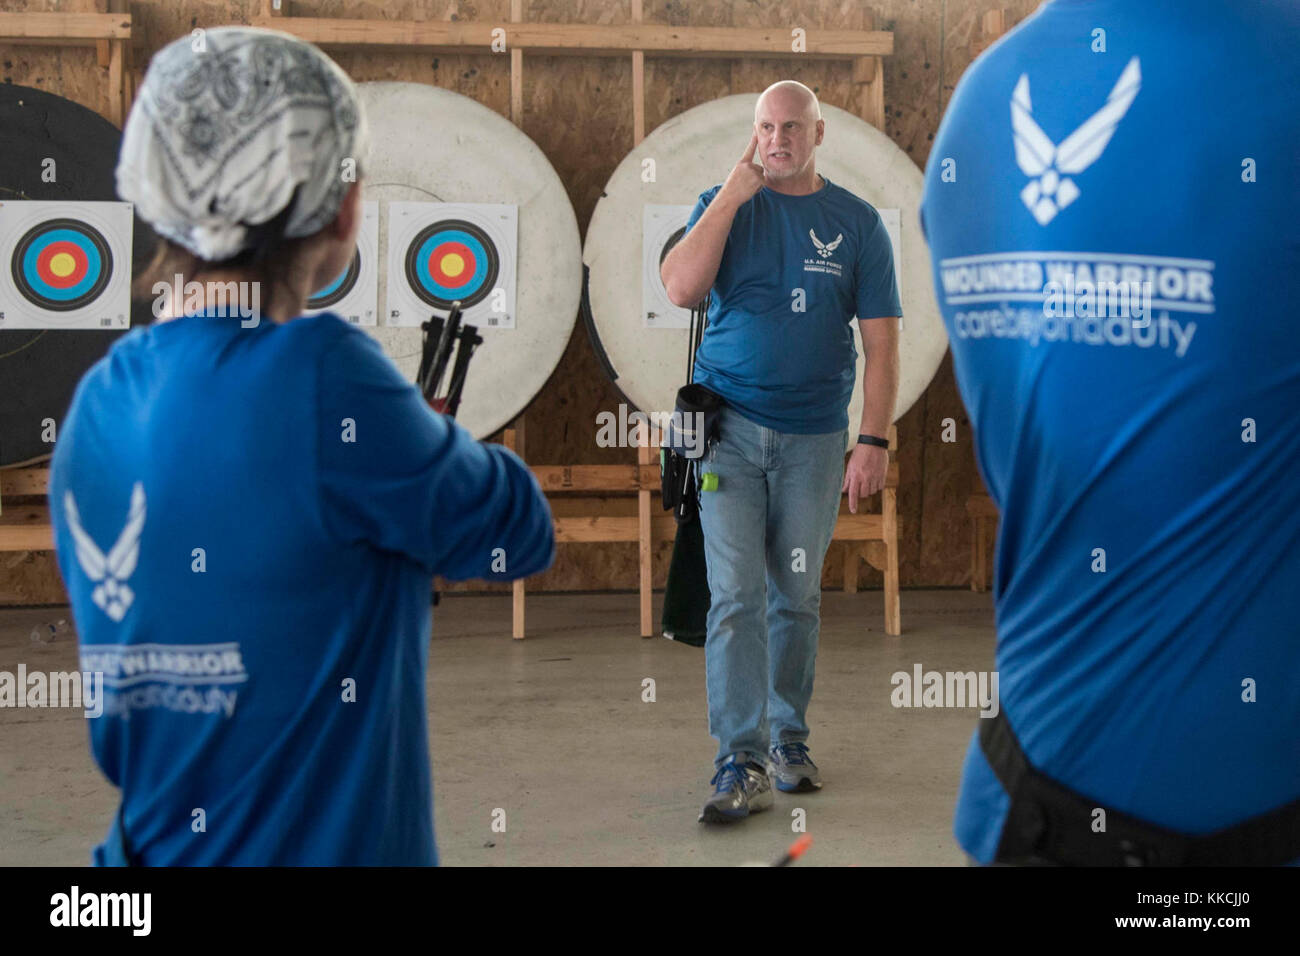 Jeff Matuszak, Warrior CARE coach, teaches wounded warriors how to shoot a bow and arrow during an archery training session as part of the Air Force Wounded Warrior CARE Event at Joint Base Andrews, Md., Nov. 13, 2017. This was one of multiple activities during the event that hosted various sports presentations and lessons for injured service members to introduce them to new outlets and prepare potential competitors for the 2018 Department of Defense Warrior Games and 2018 Invictus Games. (U.S. Air Force photo by Airman 1st Class Valentina Lopez) Stock Photo